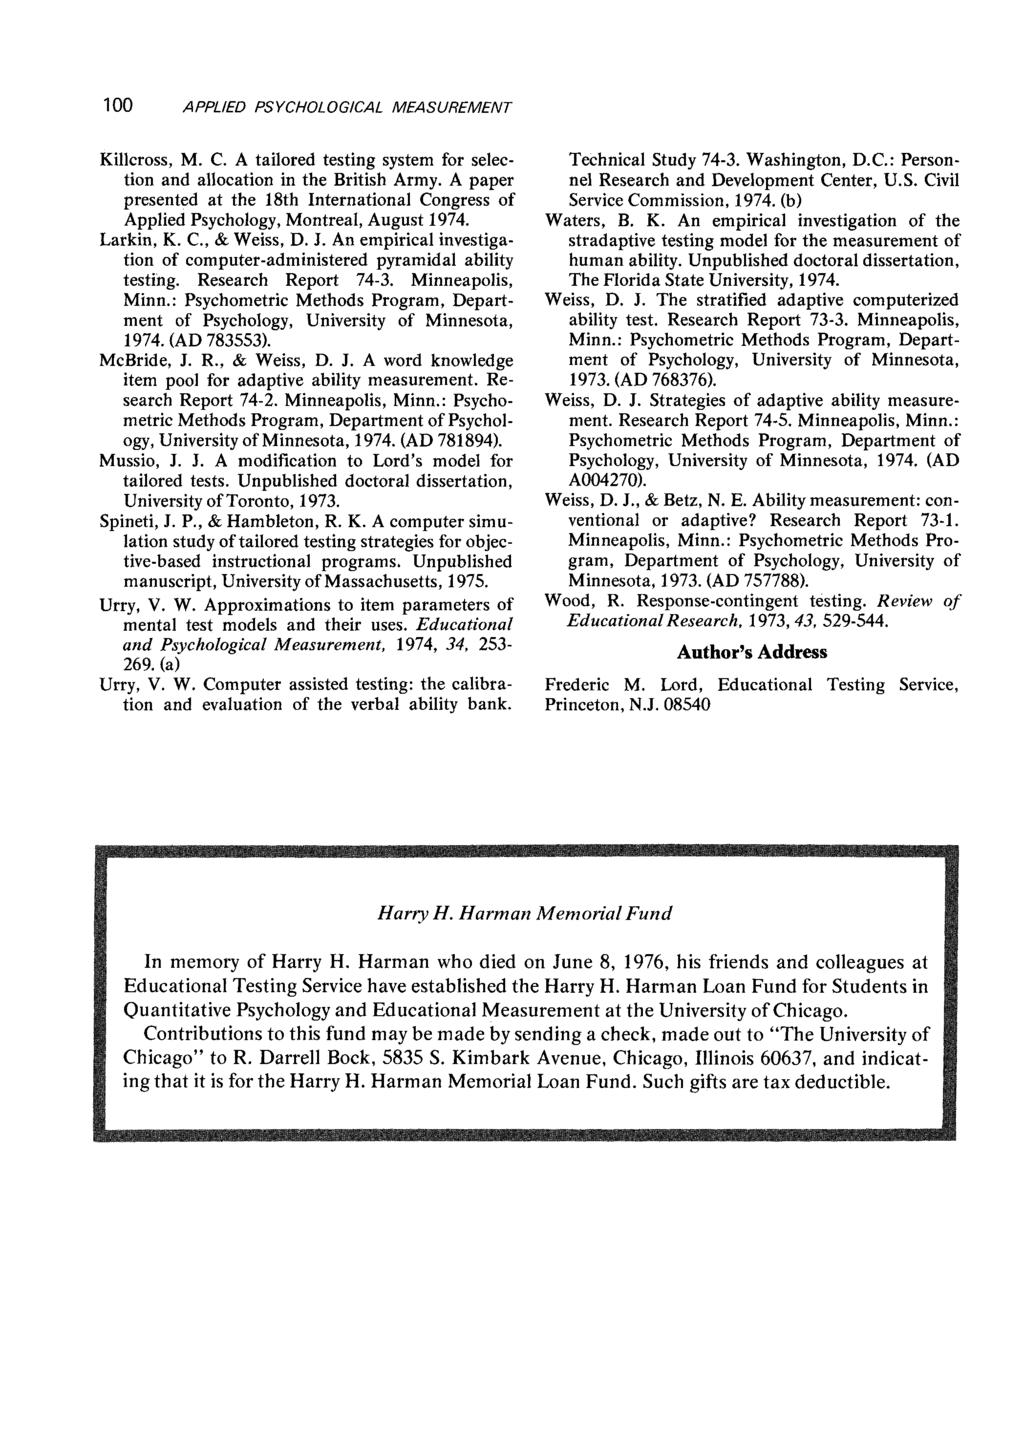 100 Killcross, M. C. A tailored testing system for selection and allocation in the British Army. A paper presented at the 18th International Congress of Applied Psychology, Montreal, August 1974.